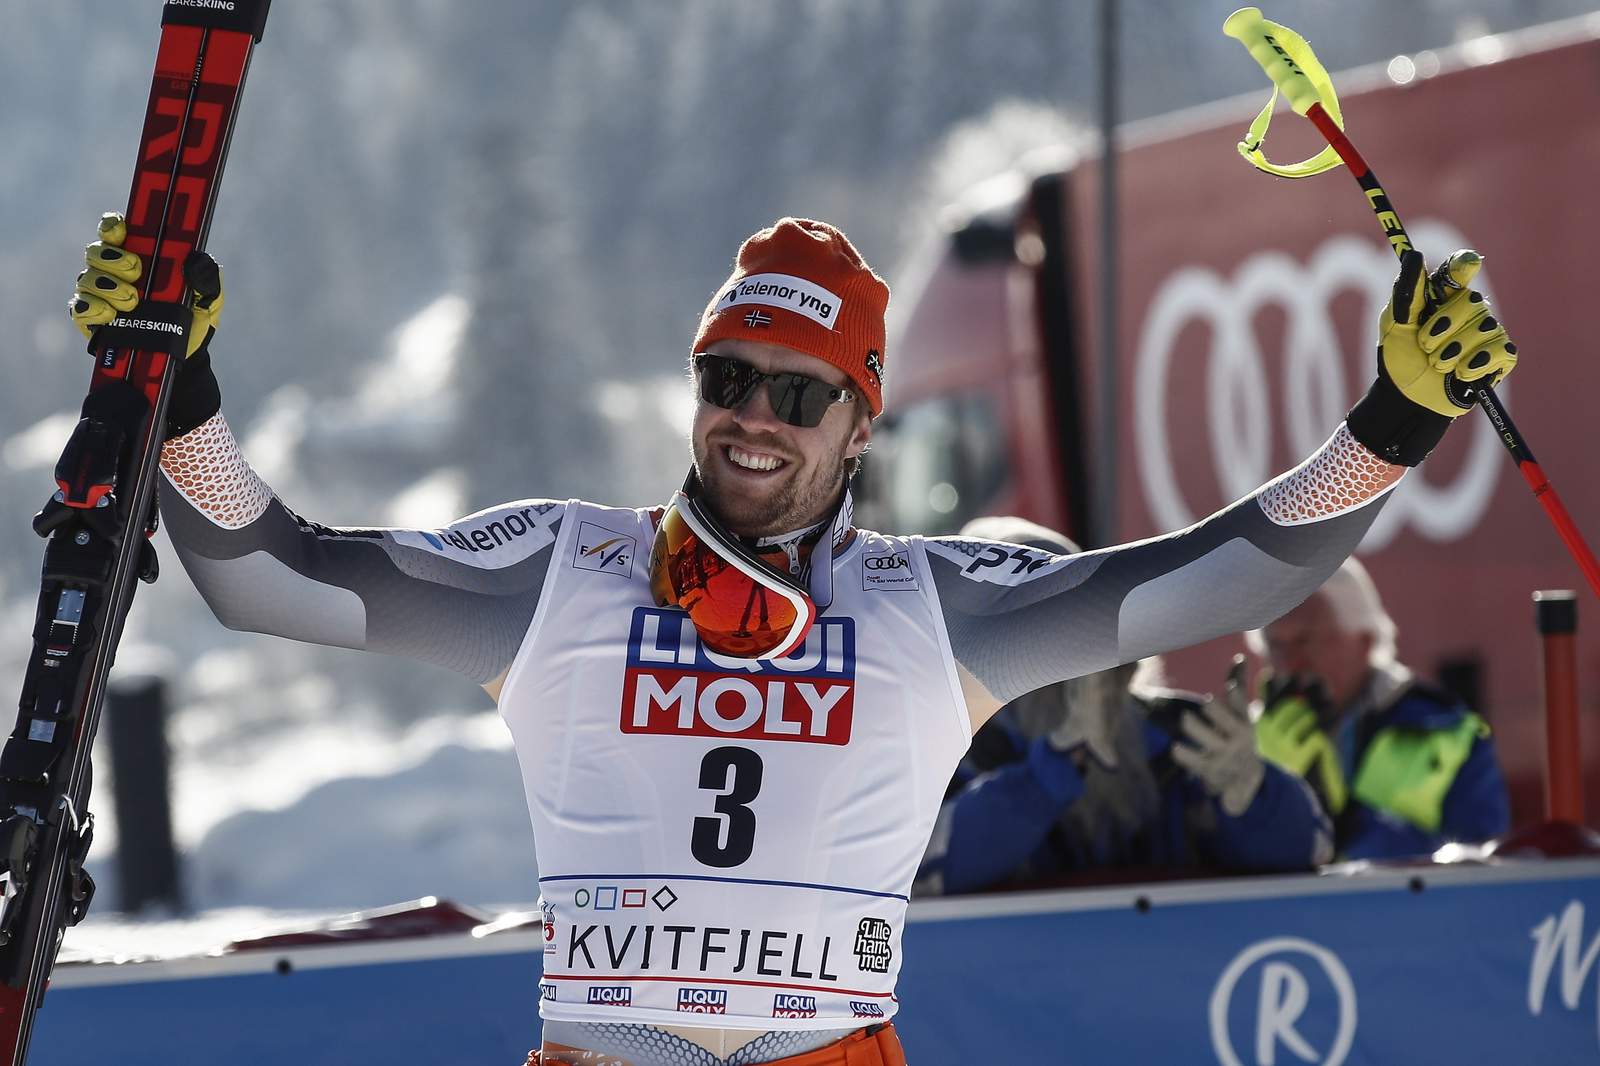 Kilde takes World Cup lead with 2nd in downhill won by Mayer